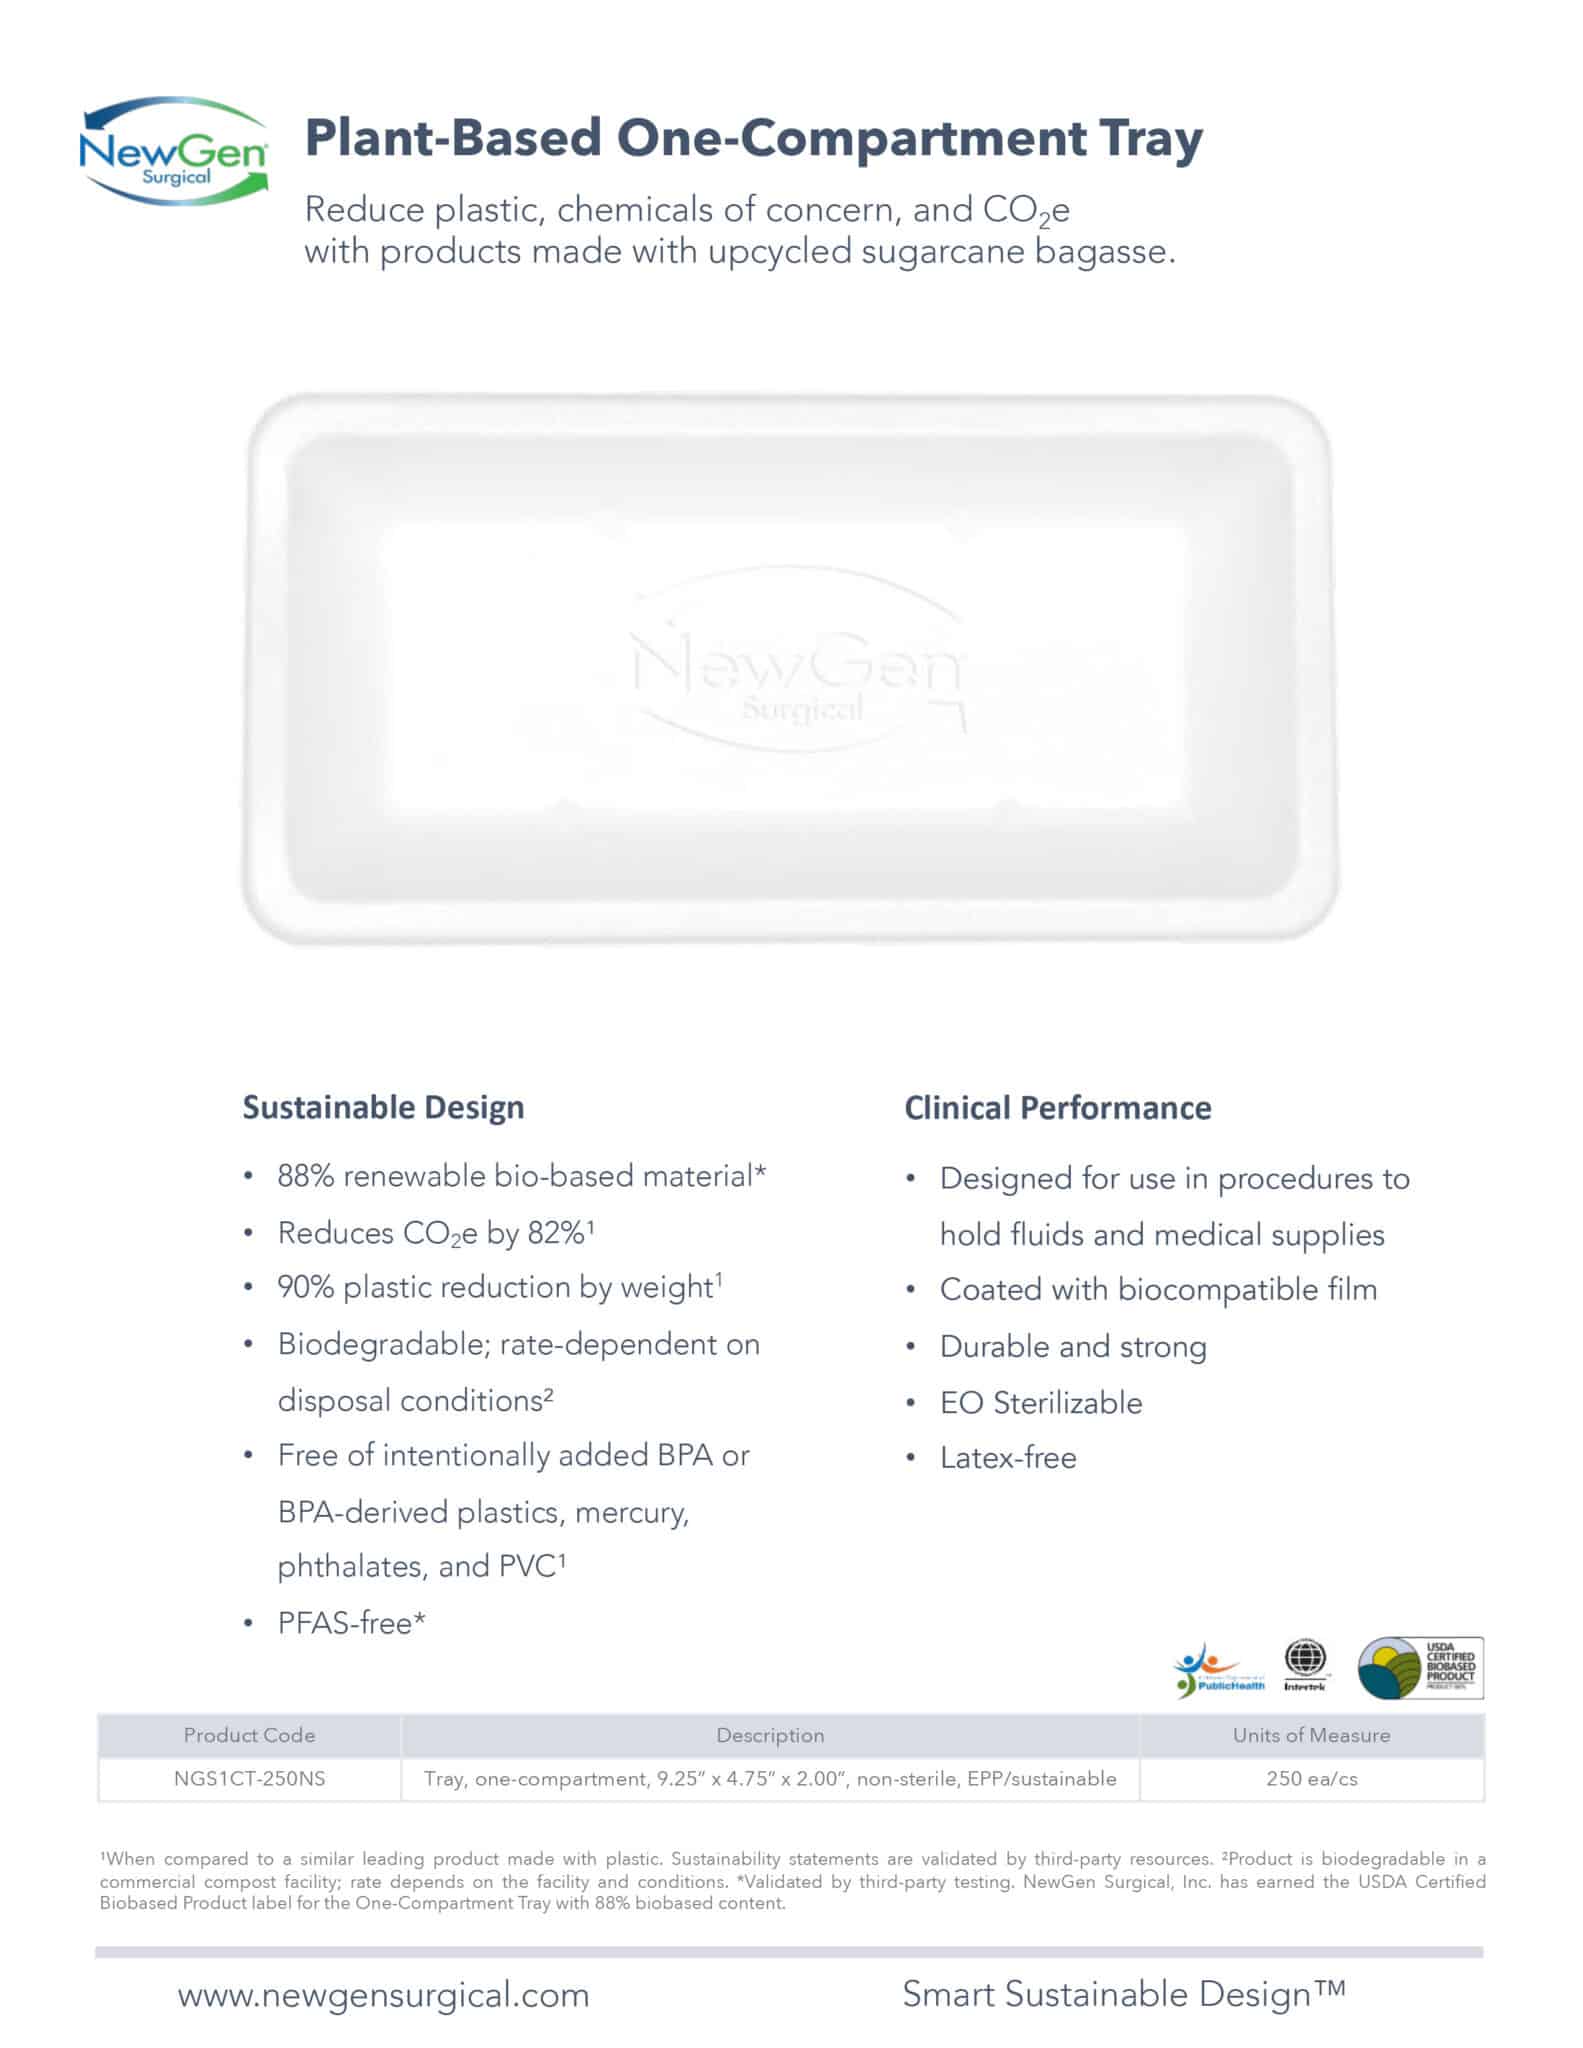 One-Compartment Tray Product Sheet